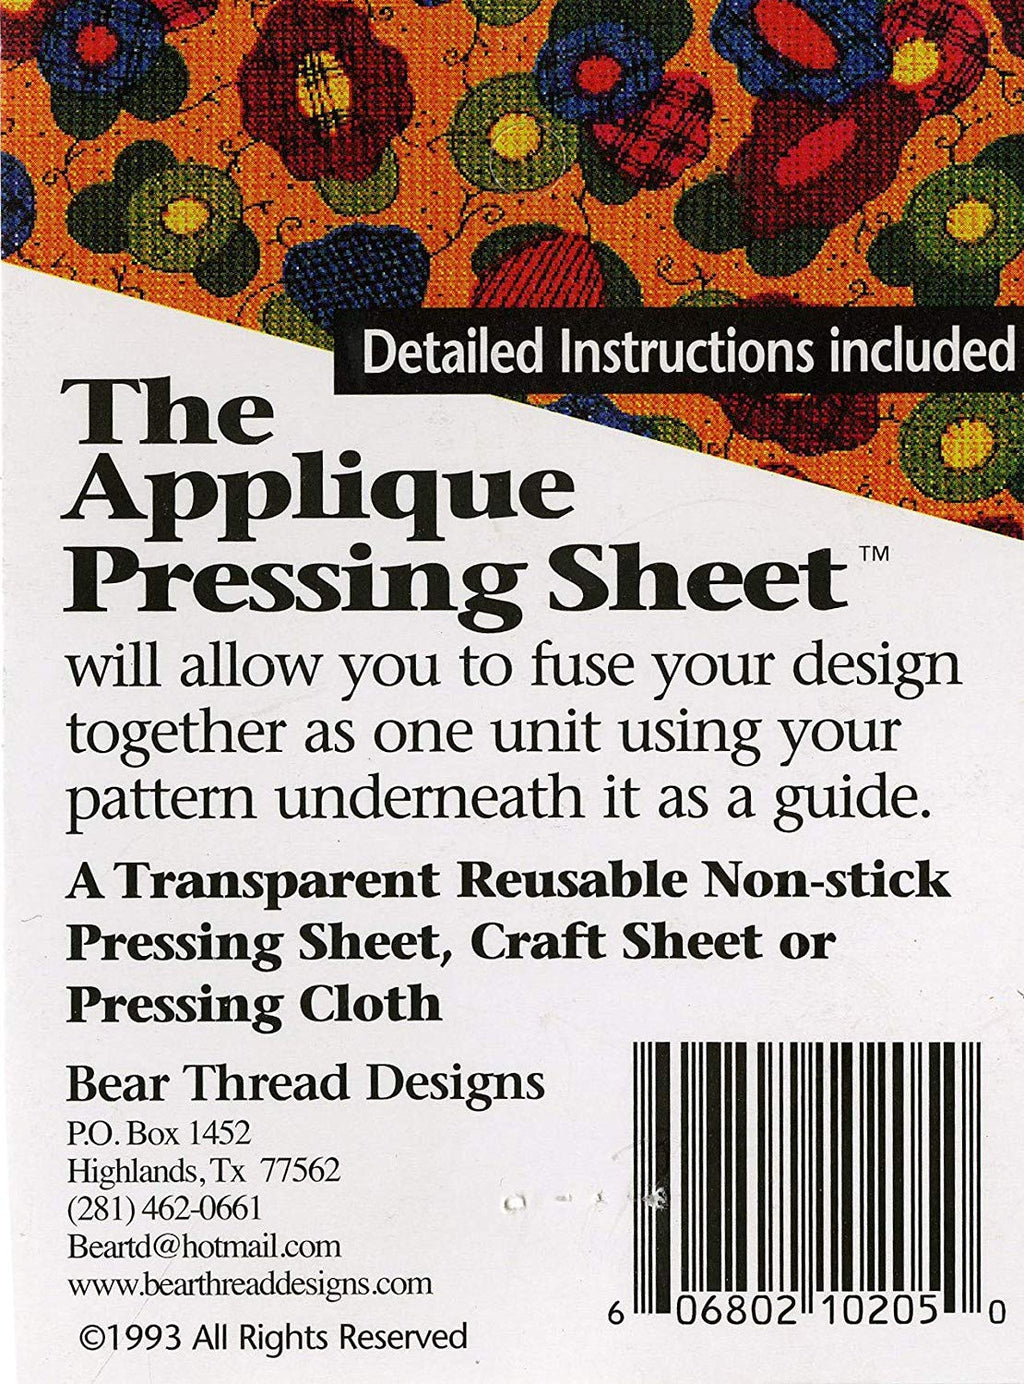 How to Use an Applique Pressing Sheet 